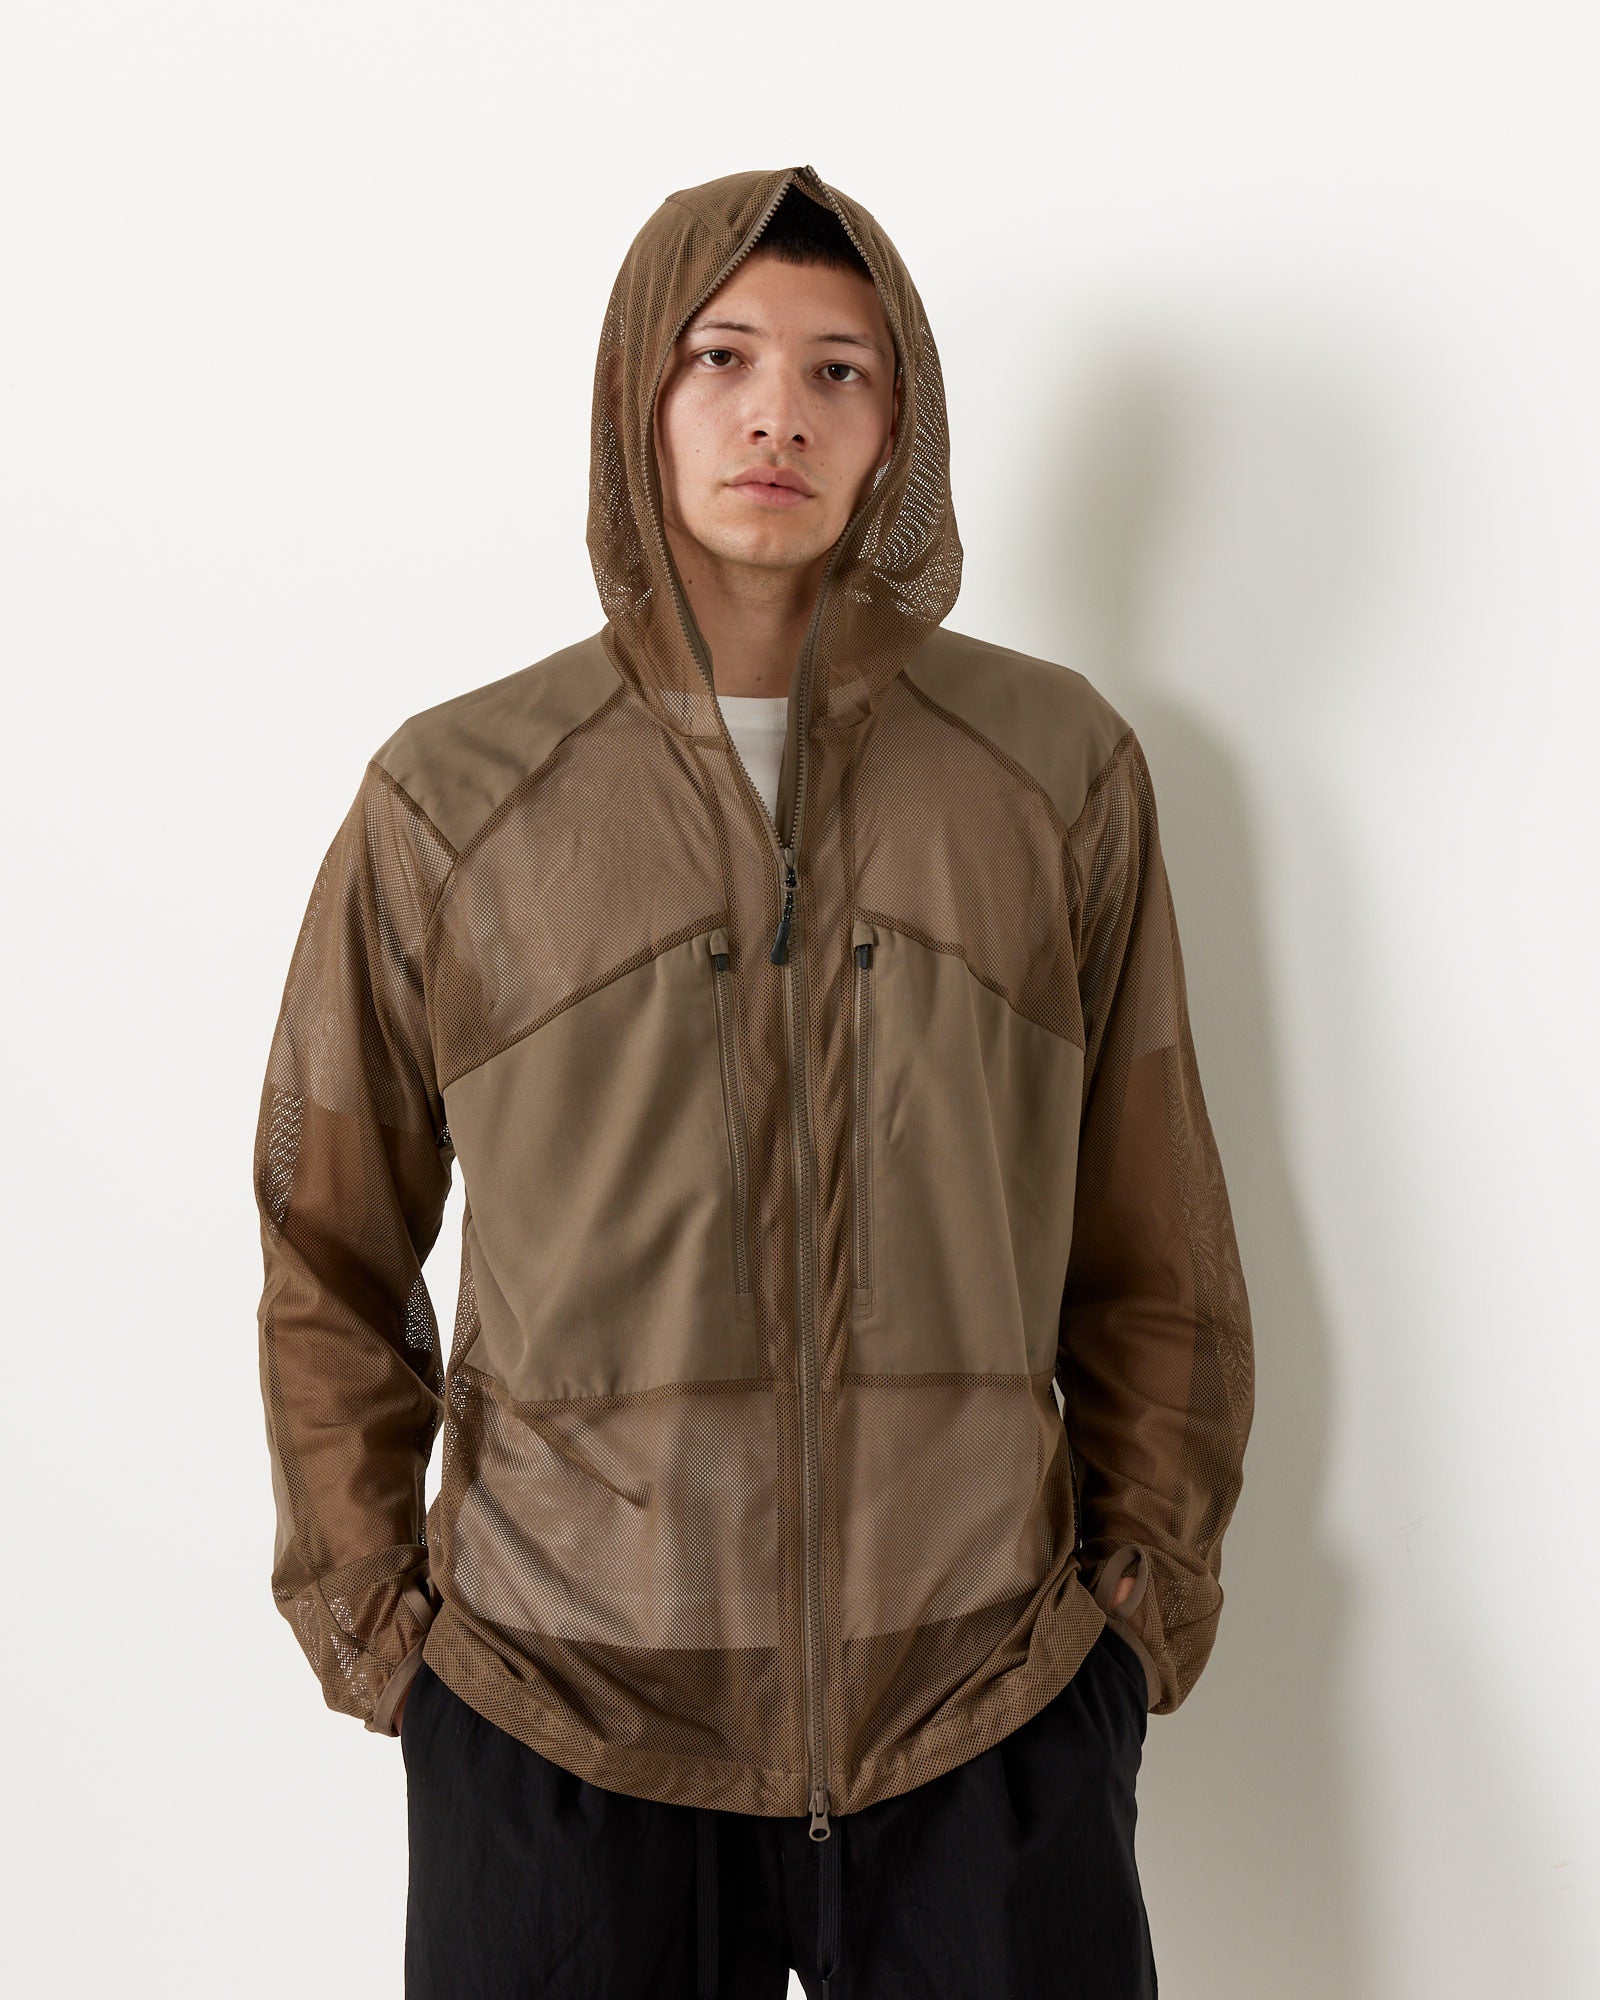 Insect Shield Mesh Jacket in Khaki